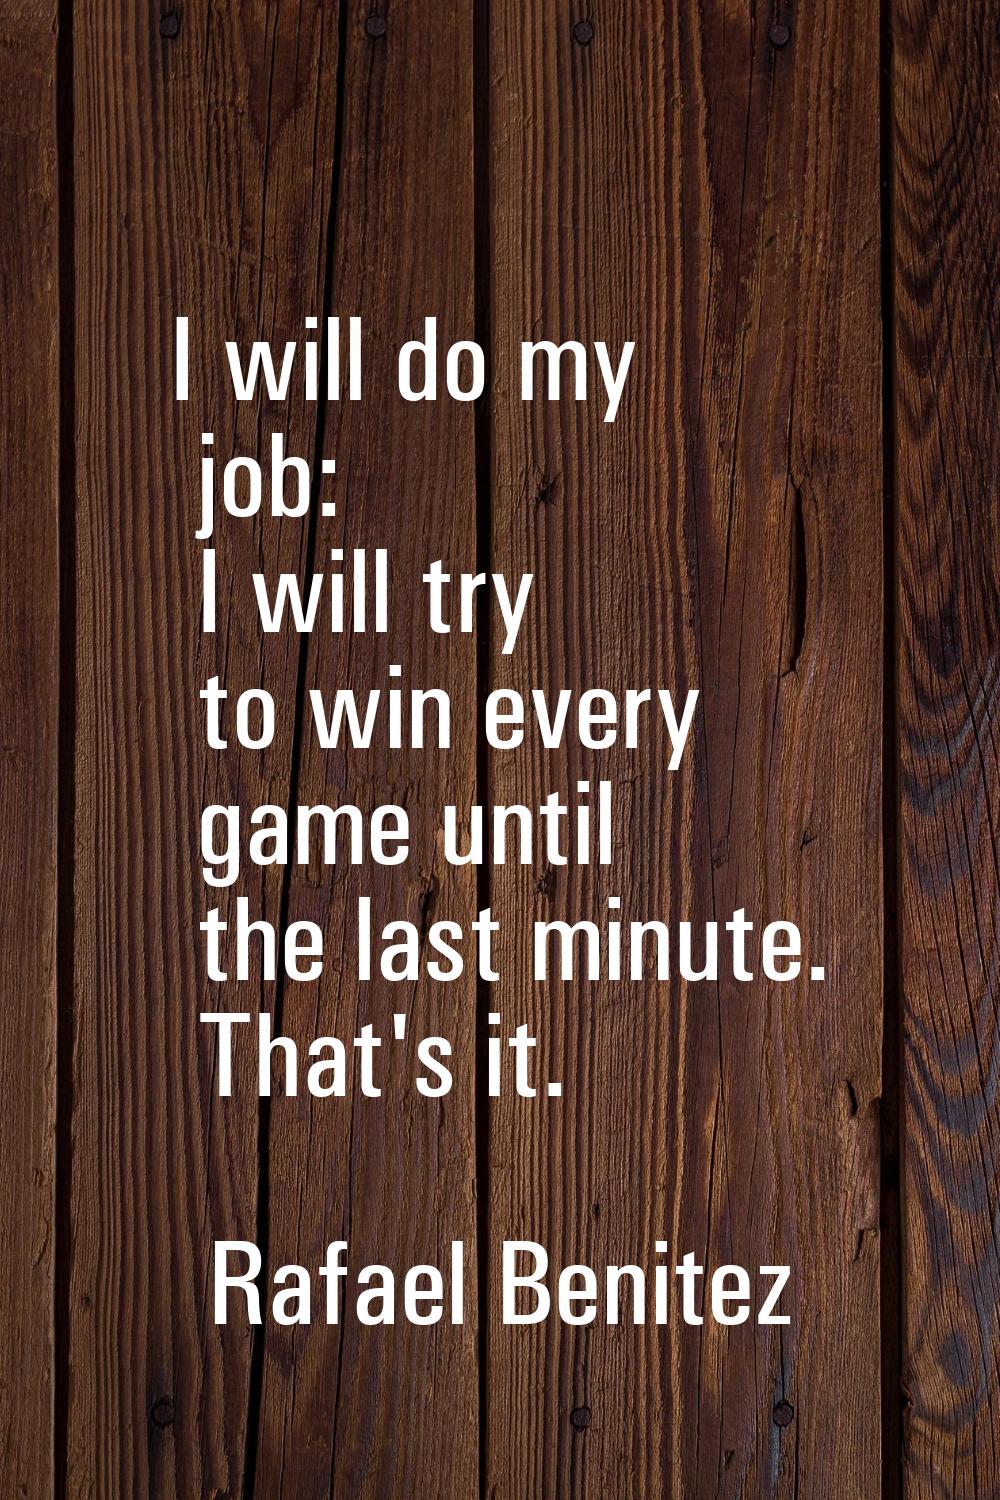 I will do my job: I will try to win every game until the last minute. That's it.